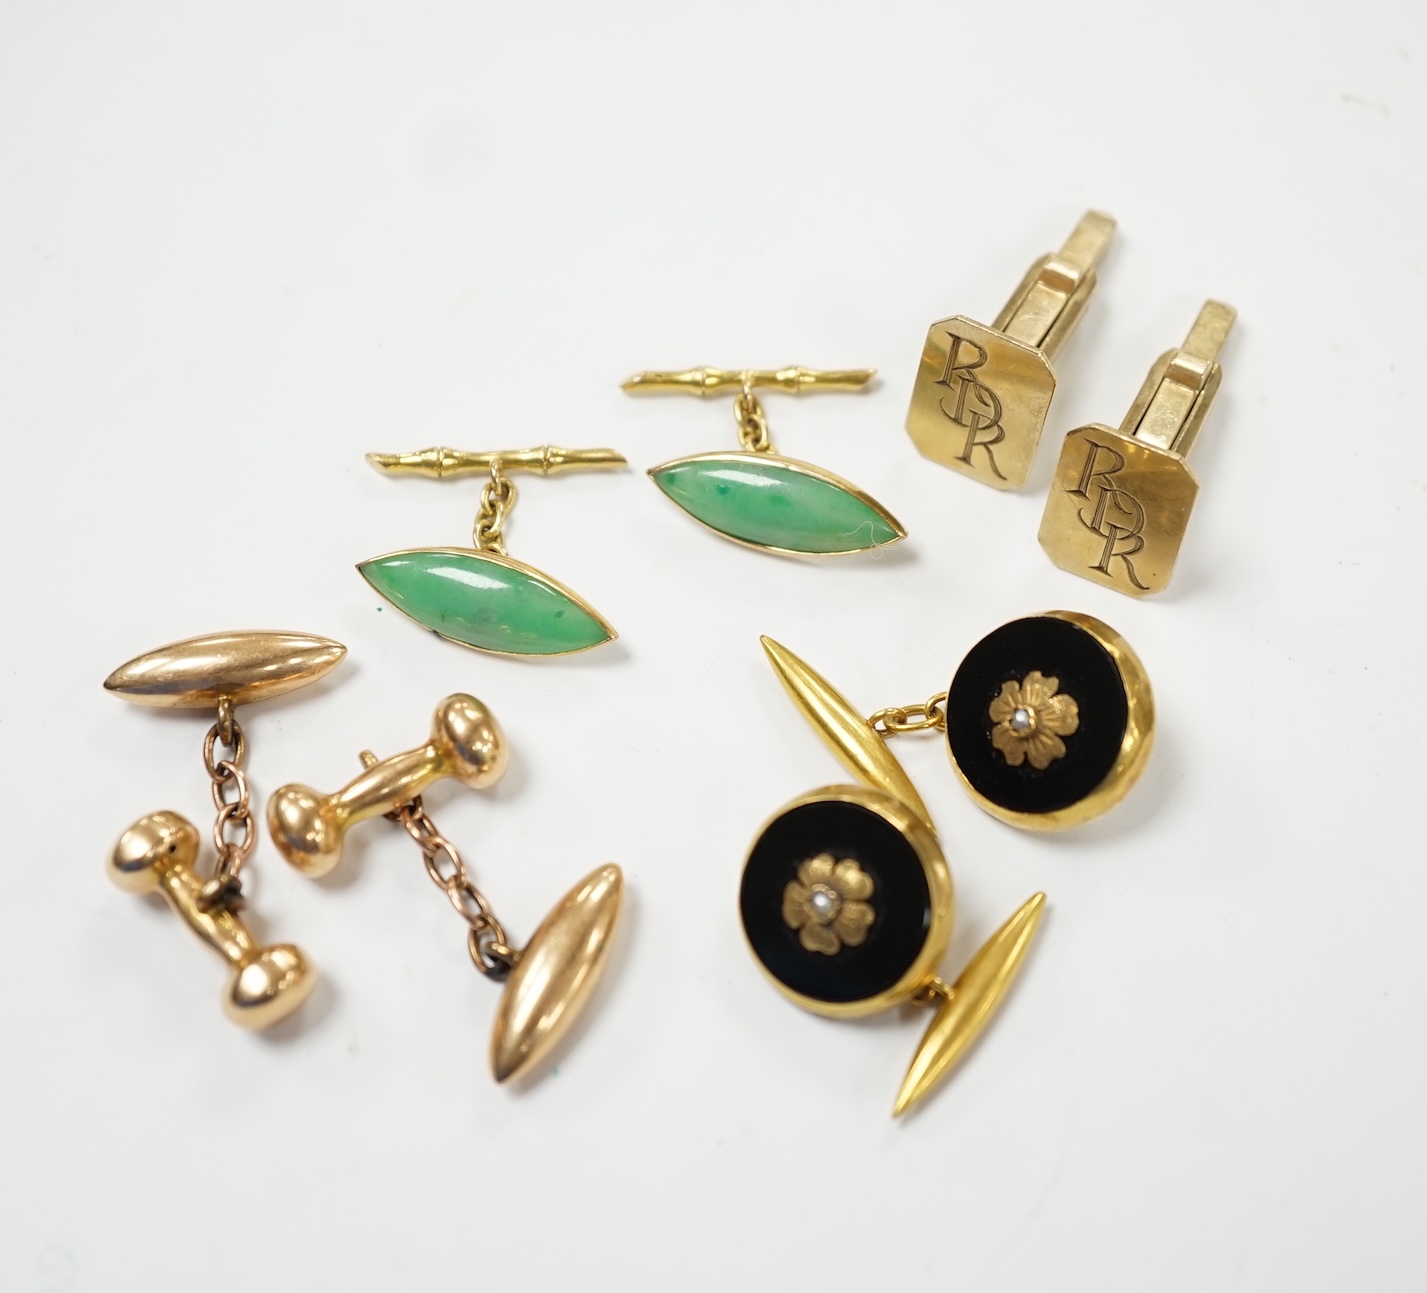 A pair of Edwardian 15ct gold torpedo shaped cufflinks, 9,6 grams and three other pairs of cufflinks including Chinese jade and monogrammed 9ct gold. Fair to good condition.